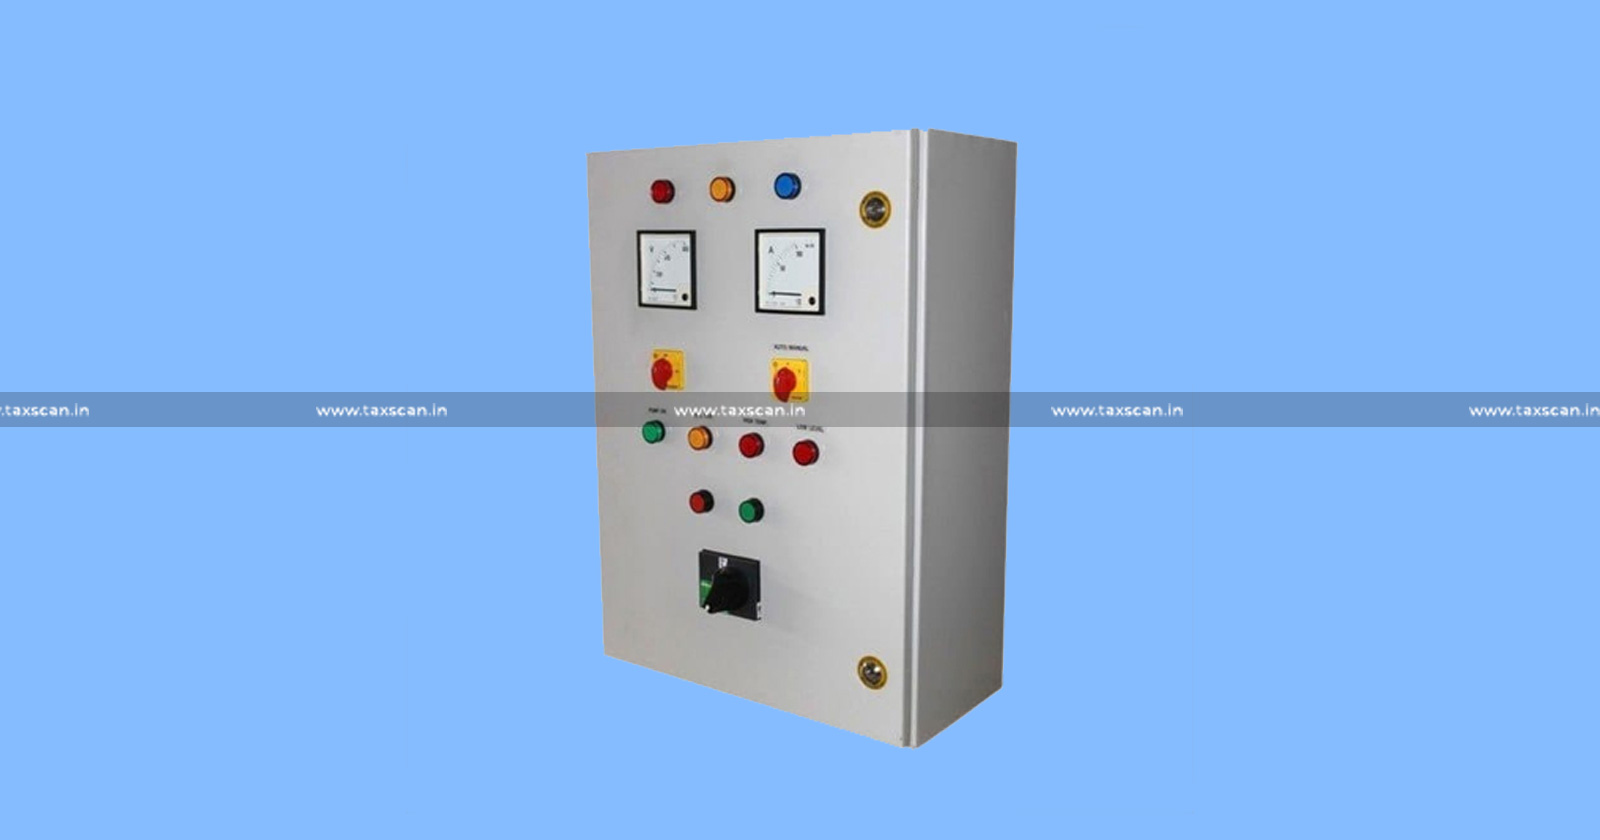 HP Fully Automatic ATS Control Panel - HP - Automatic ATS Control Panel - ATS Control Panel - Motor Starter Panel Board - Accessories - OVAT Act - Orissa High Court - Taxscan